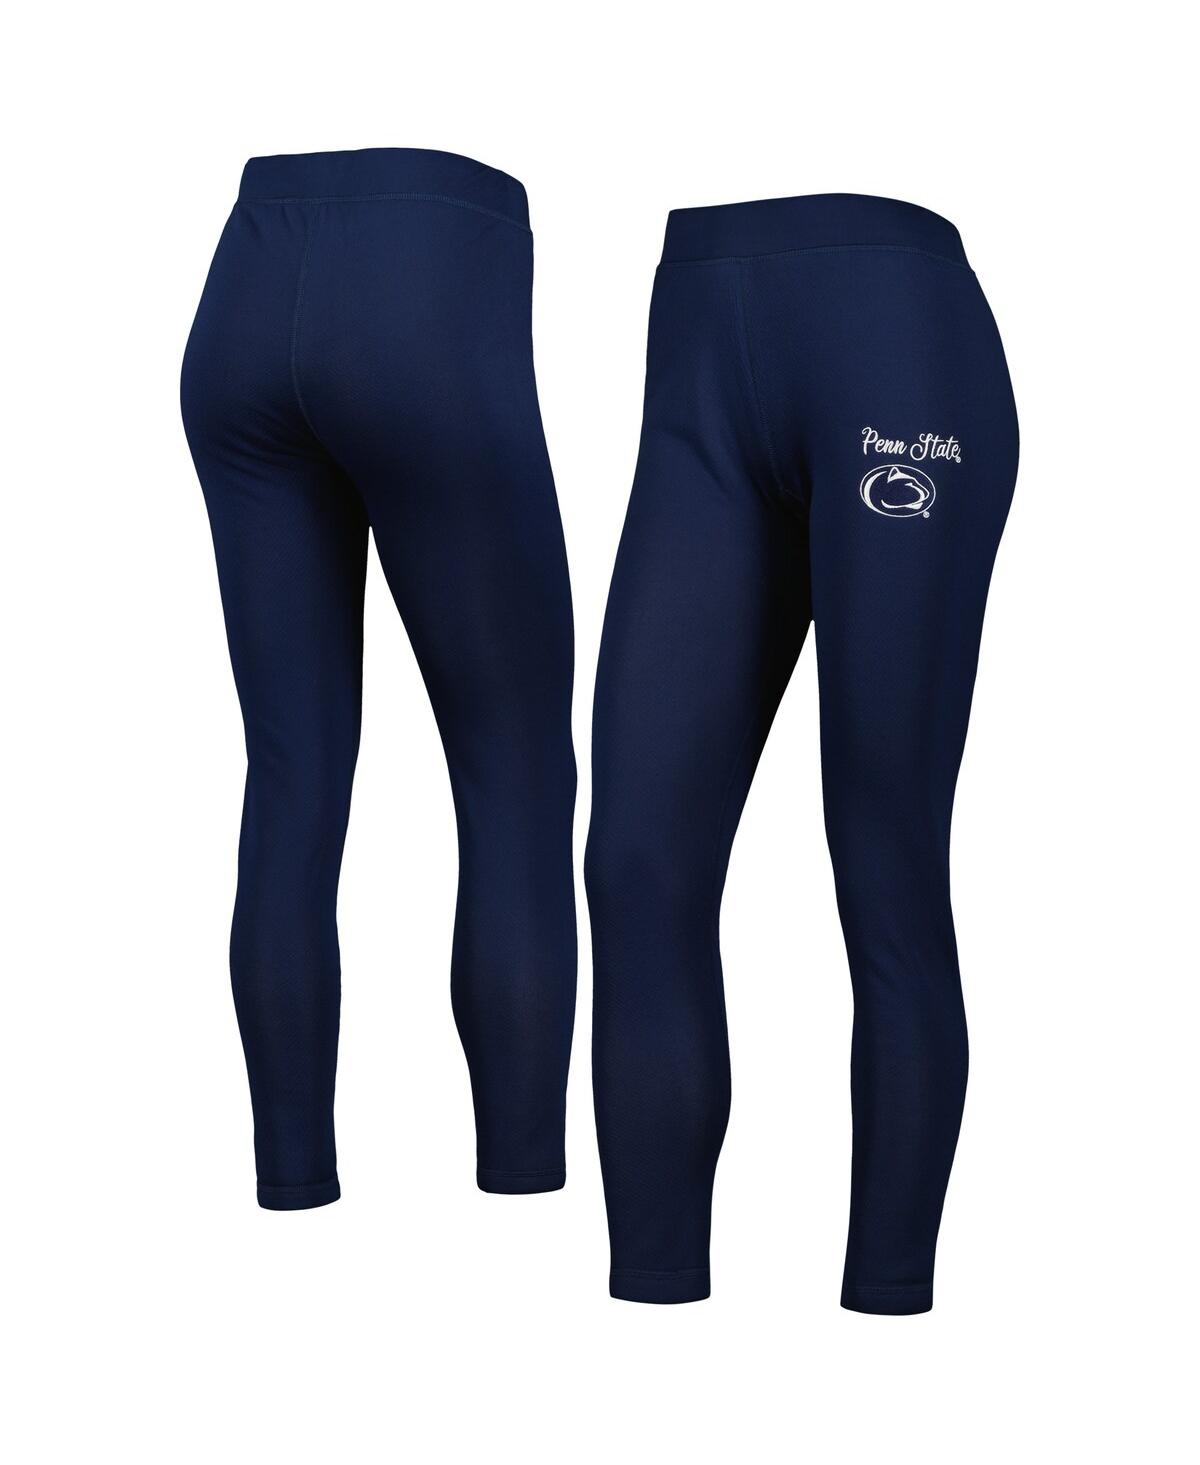 Women's Concepts Sport Navy Penn State Nittany Lions Upbeat Sherpa Leggings - Navy